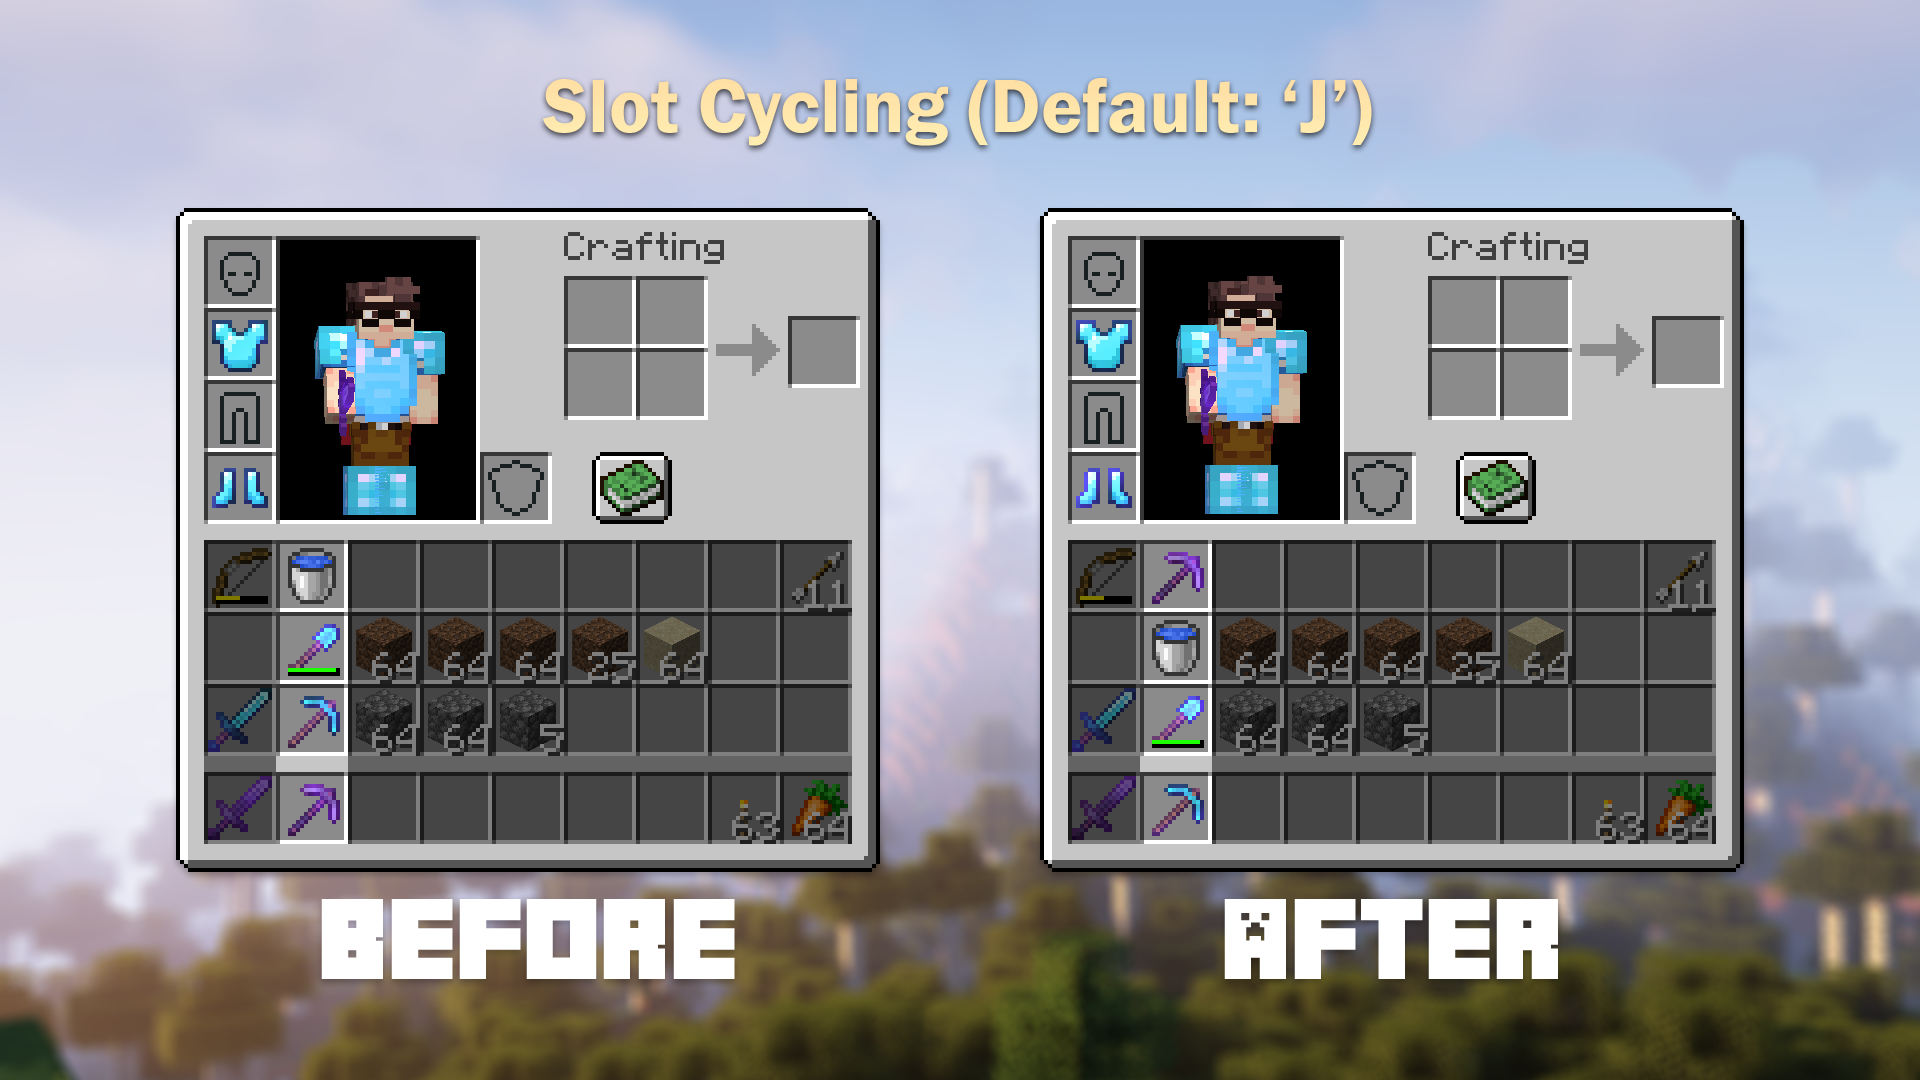 Demonstrates what happens when you cycle a single slot (default: 'J')